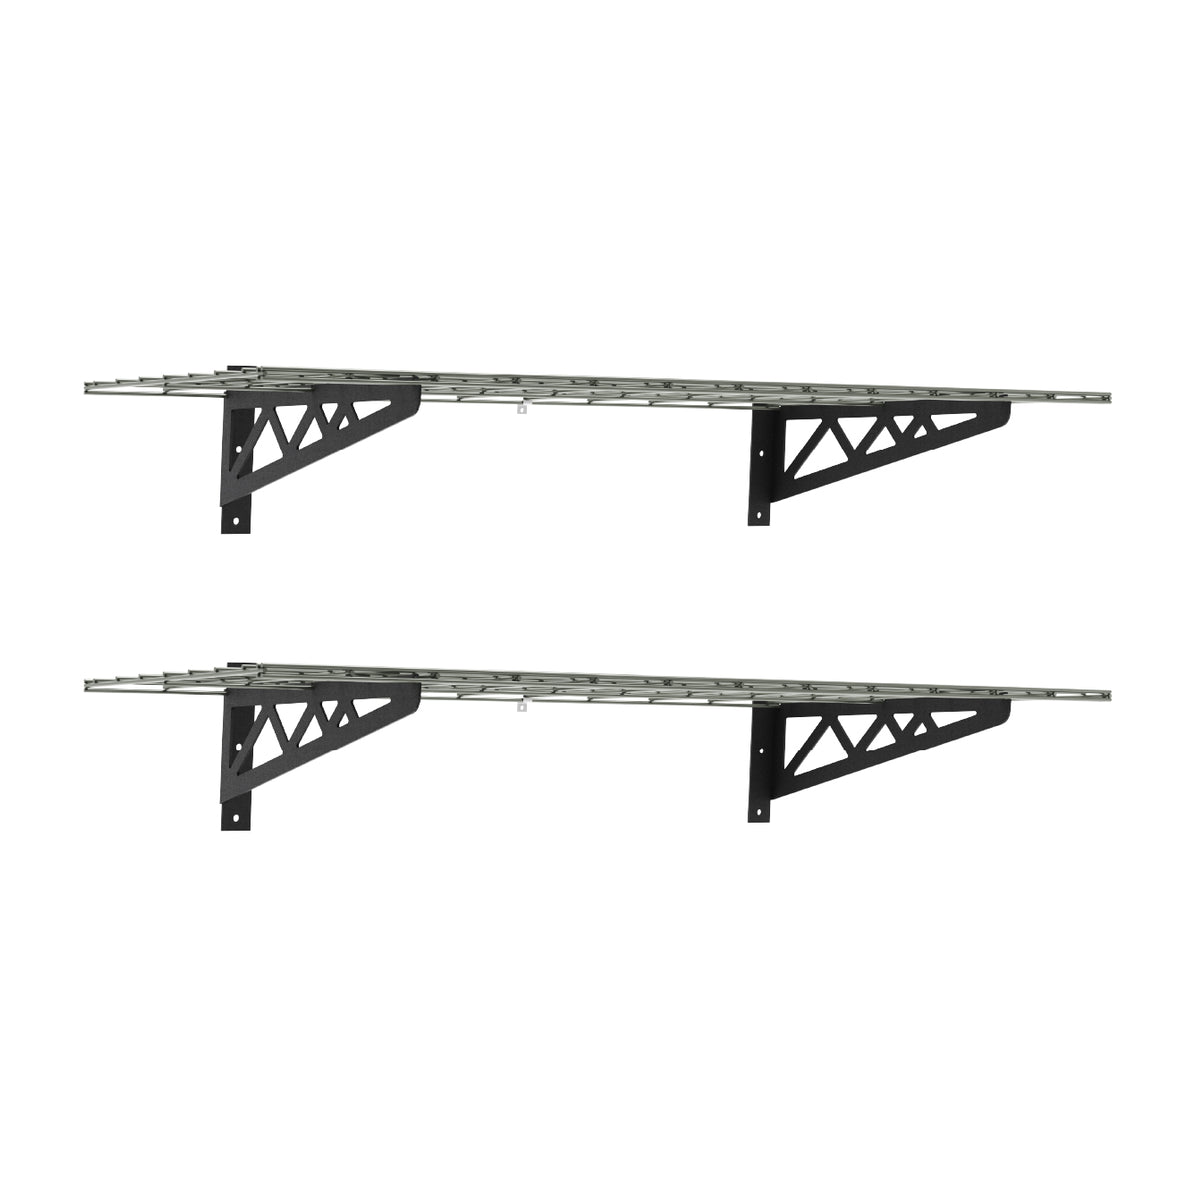 SafeRacks 18 x 48 Wall Shelves for Home & Garage with 4 Hooks